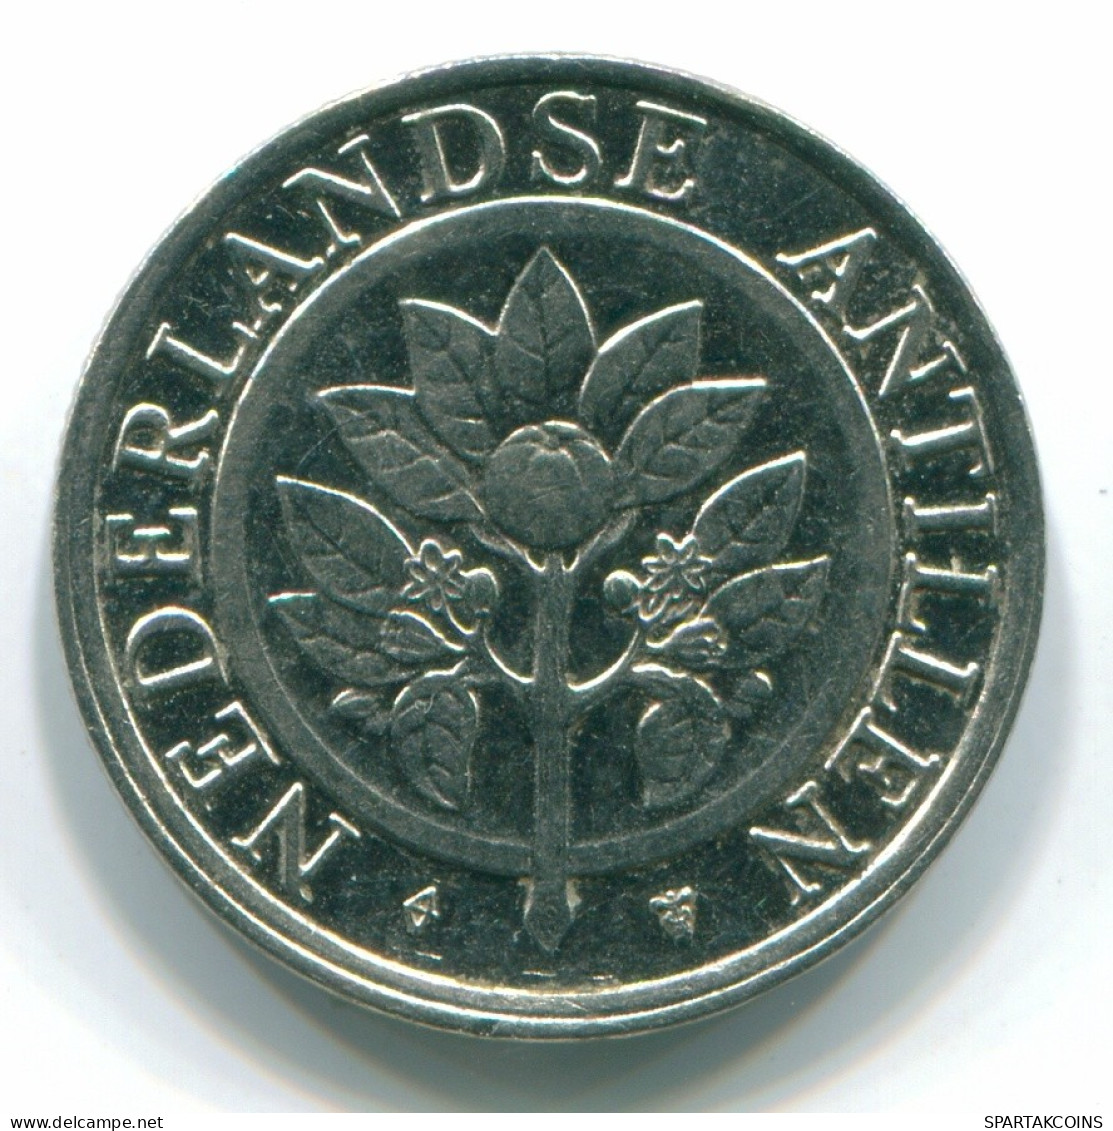 25 CENTS 1990 NETHERLANDS ANTILLES Nickel Colonial Coin #S11259.U.A - Antille Olandesi